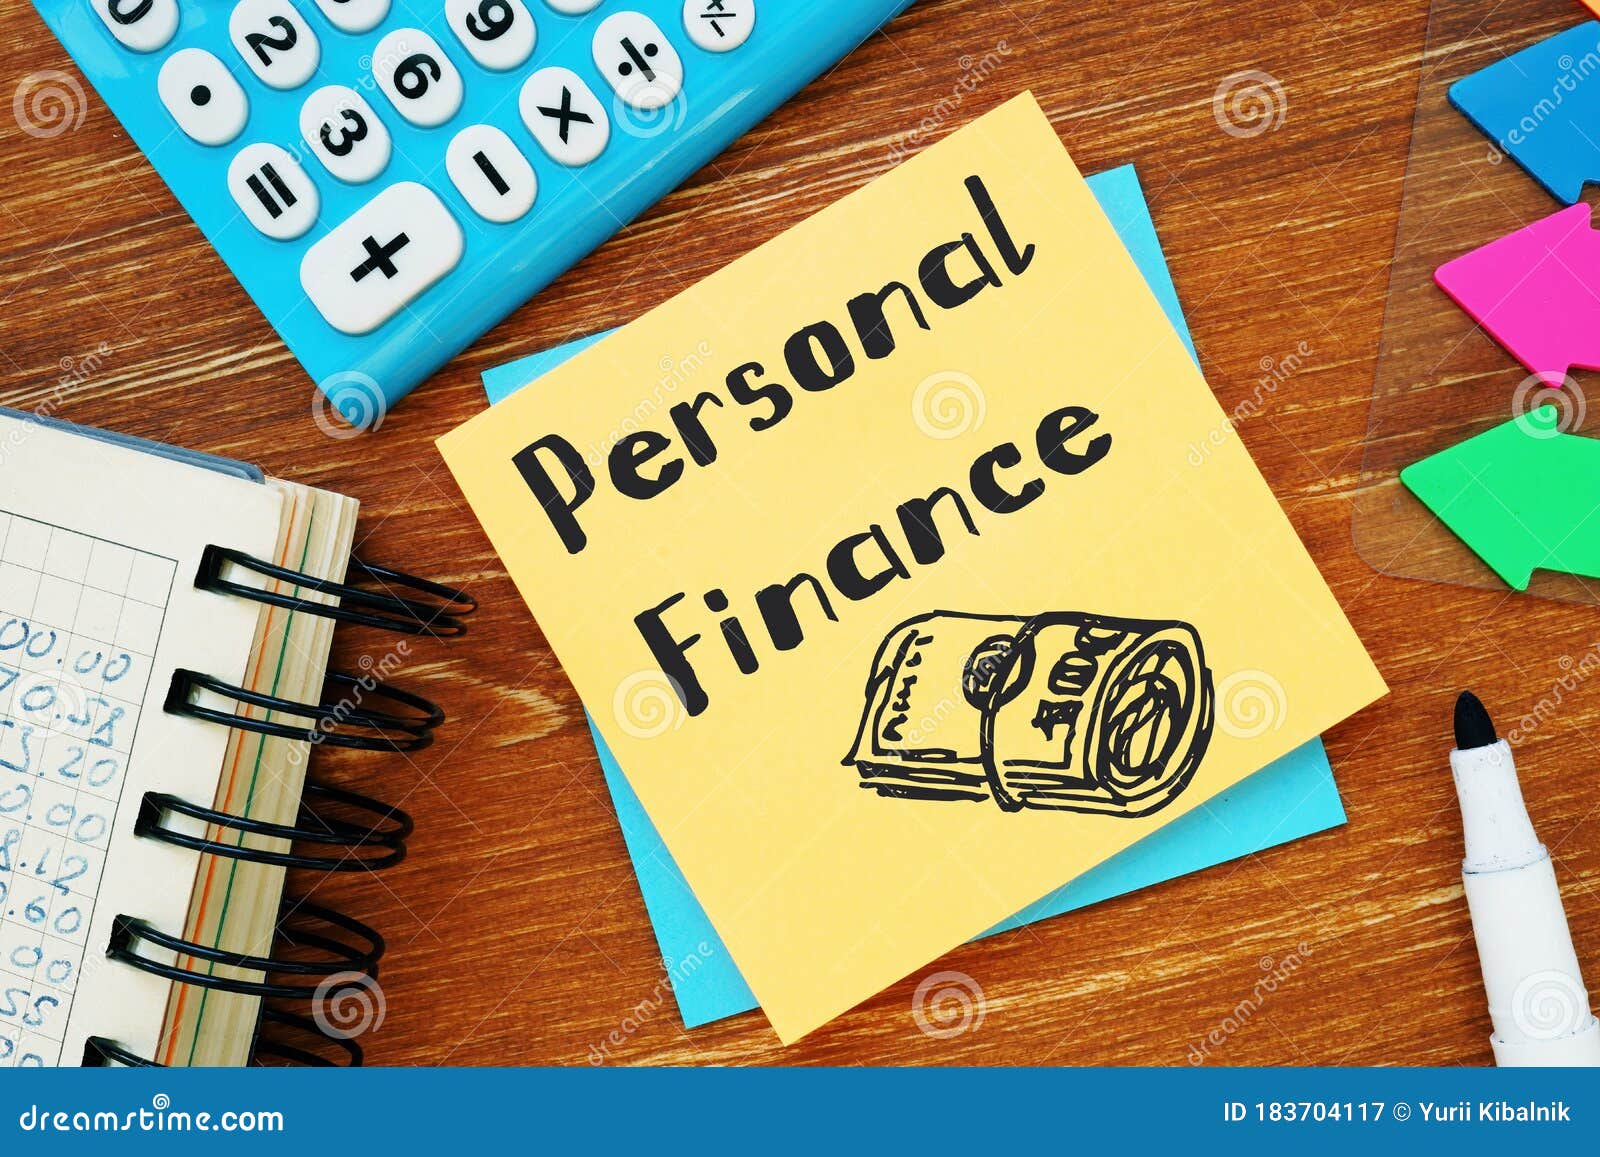 personal finance marketing meaning